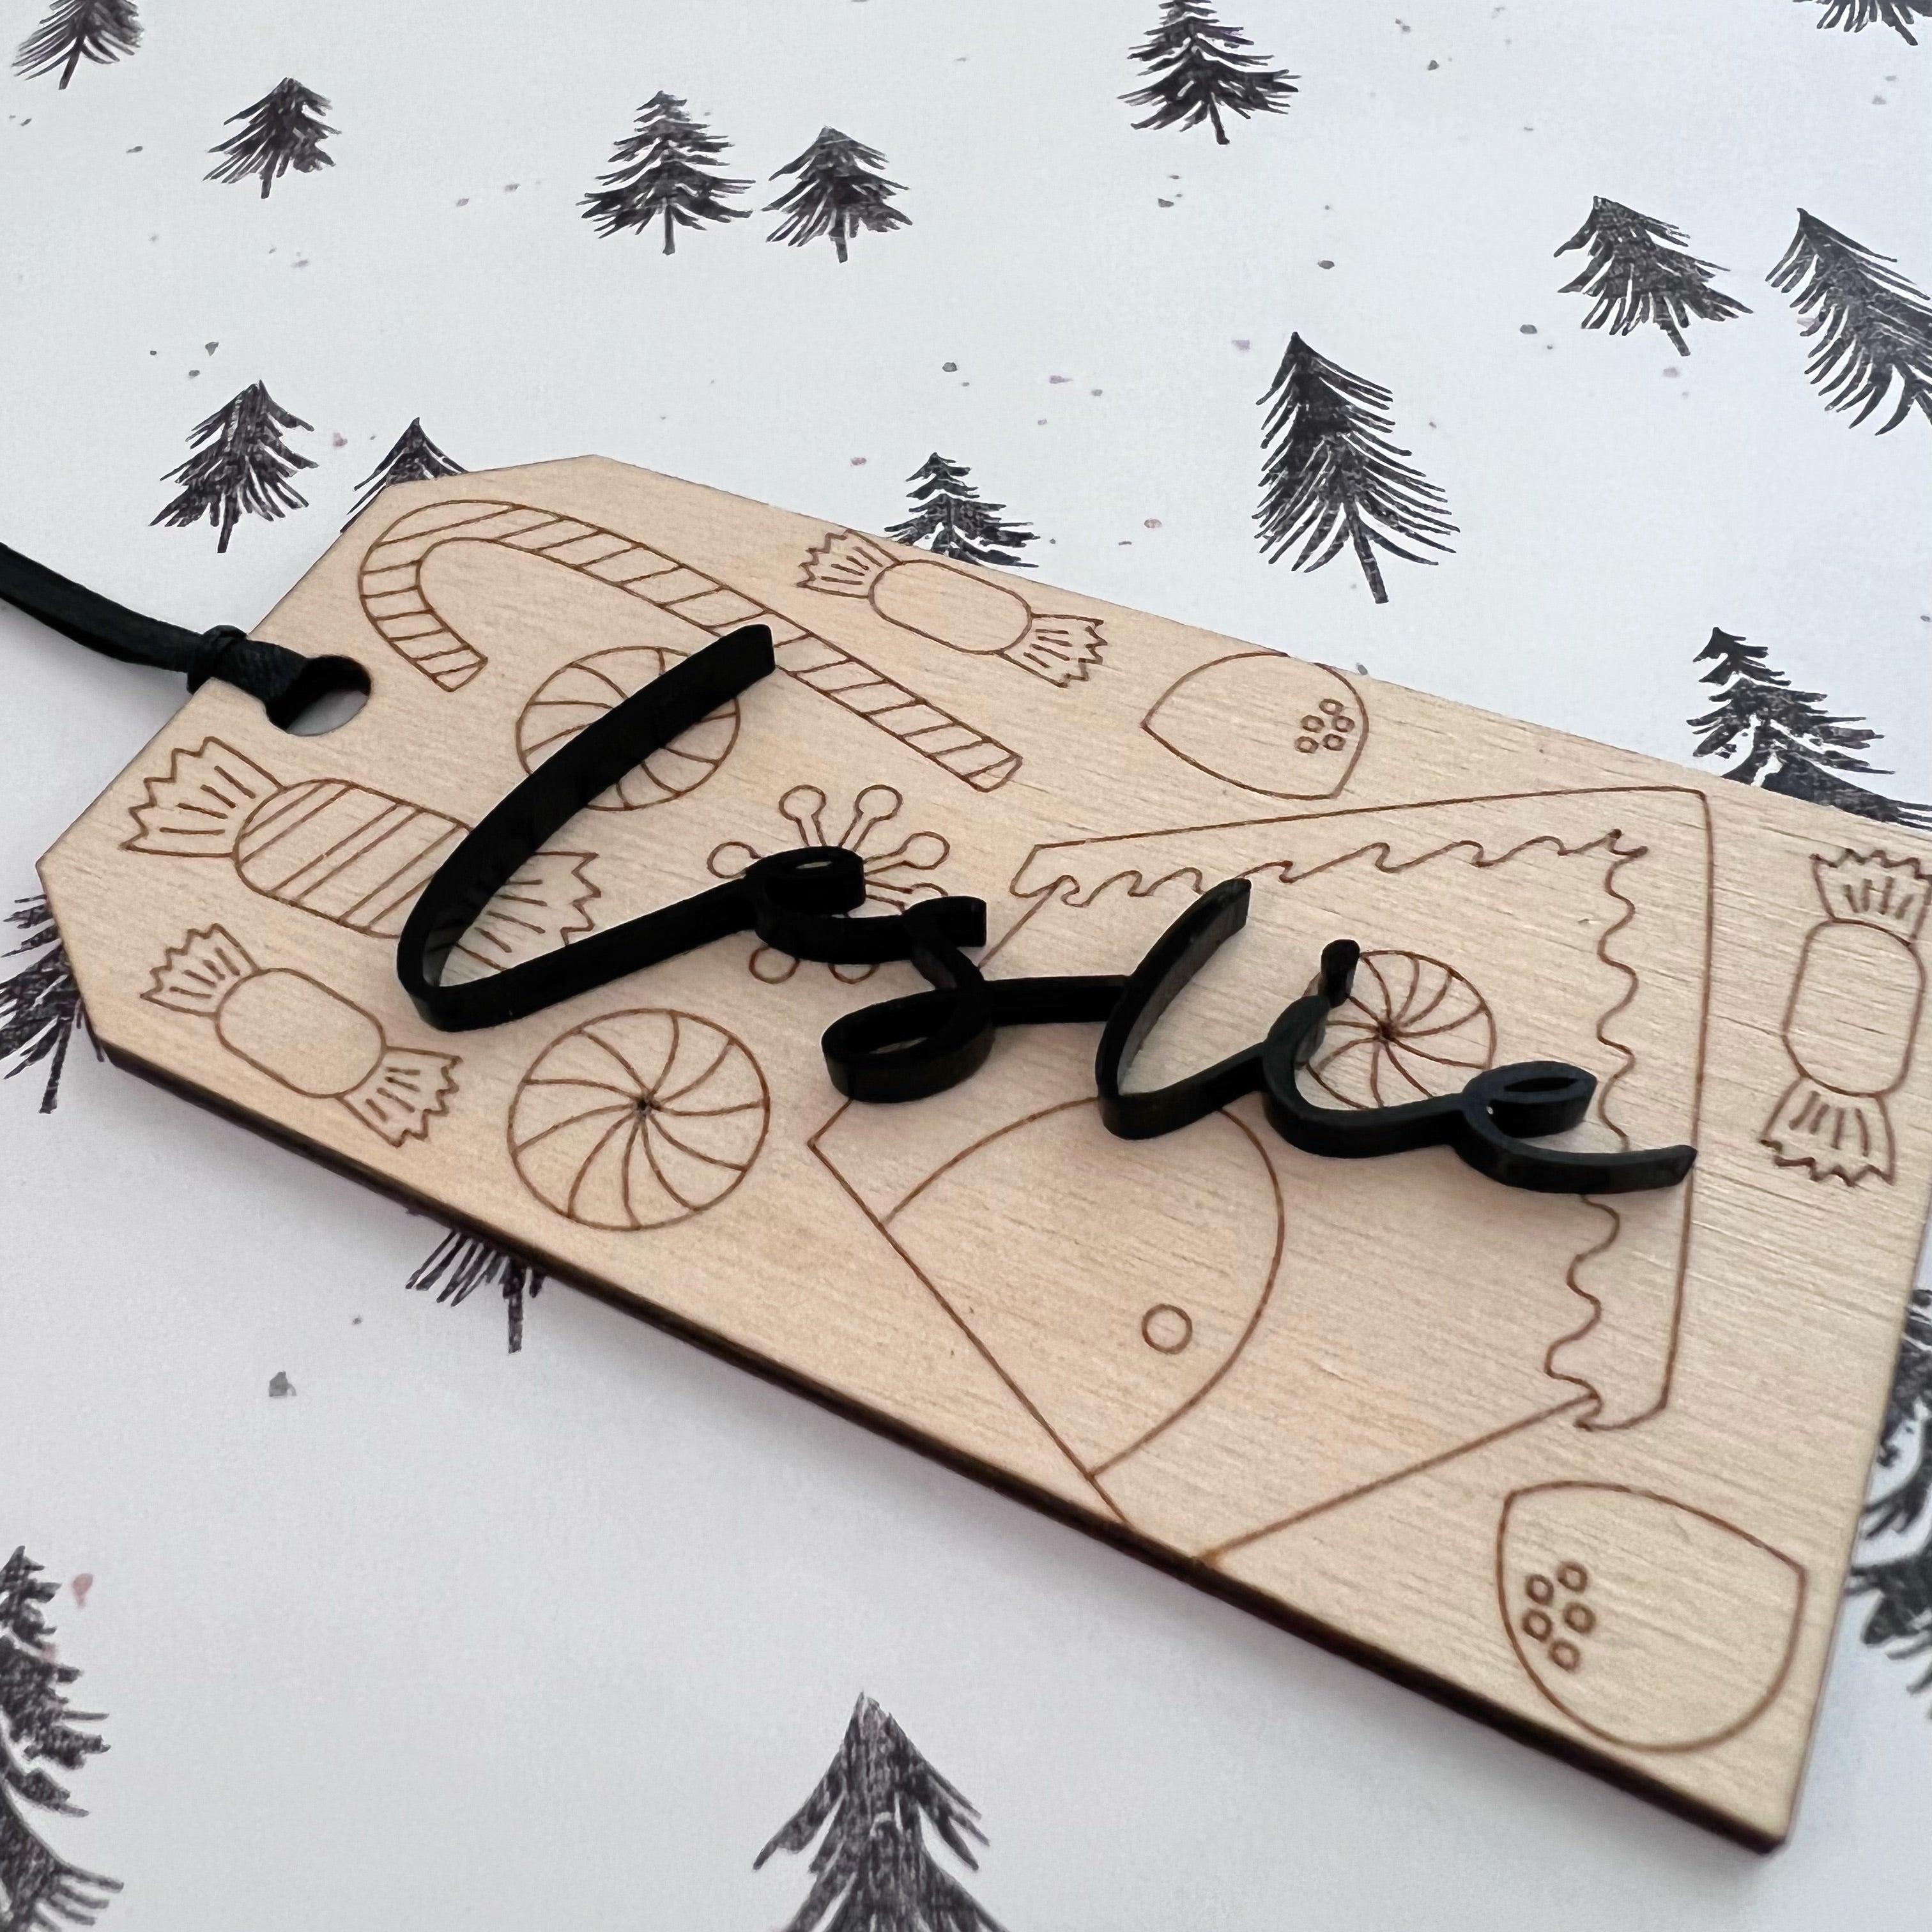 alt="wood engraved  black acrylic personalized Christmas tags"